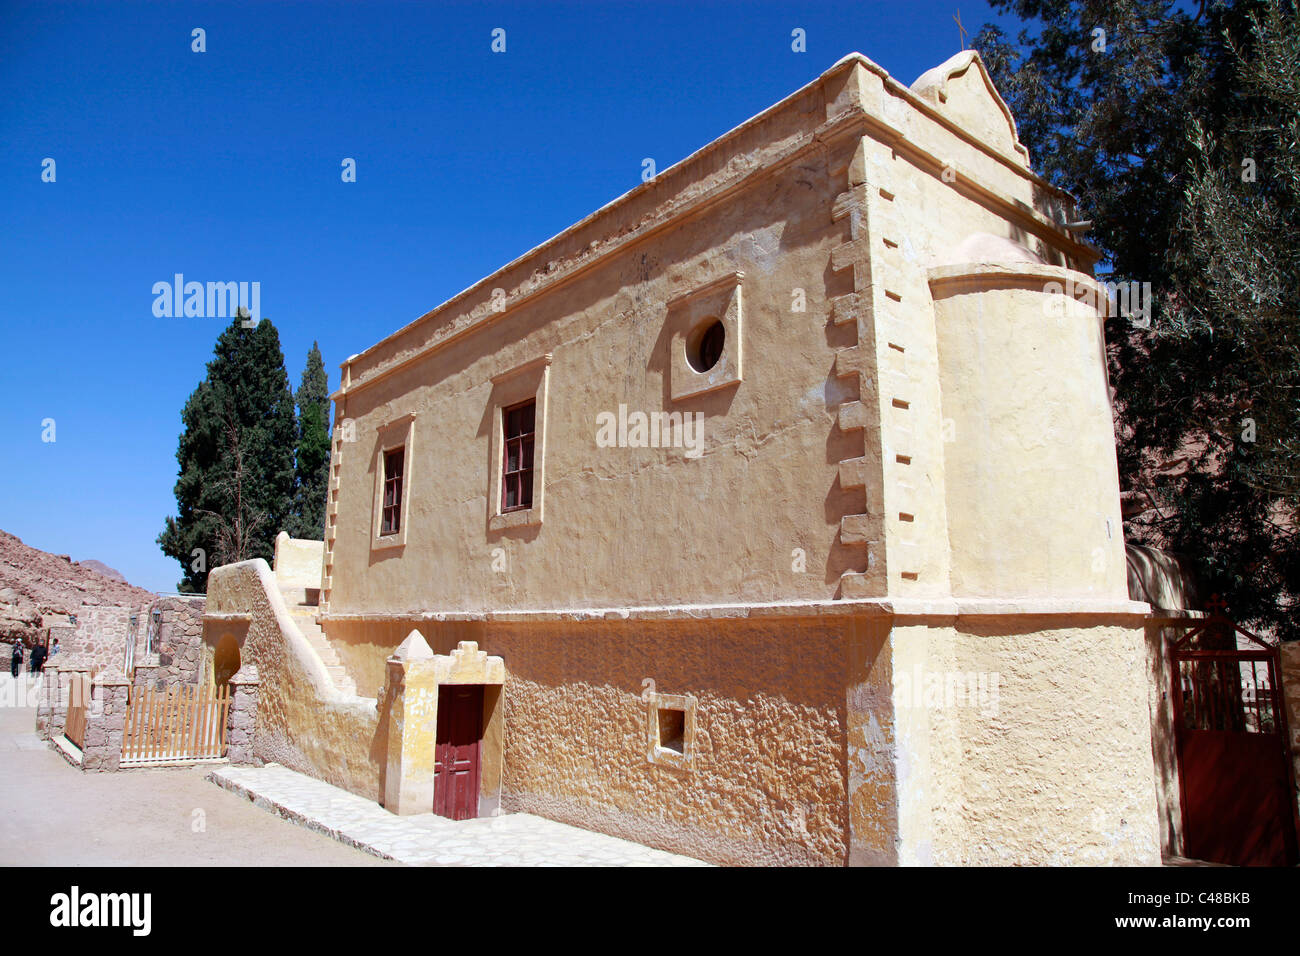 The Skull House, known as the Chapel of Saint Triphone at St. Catherine's Monastery, South Sinai Peninsula, Egypt Stock Photo